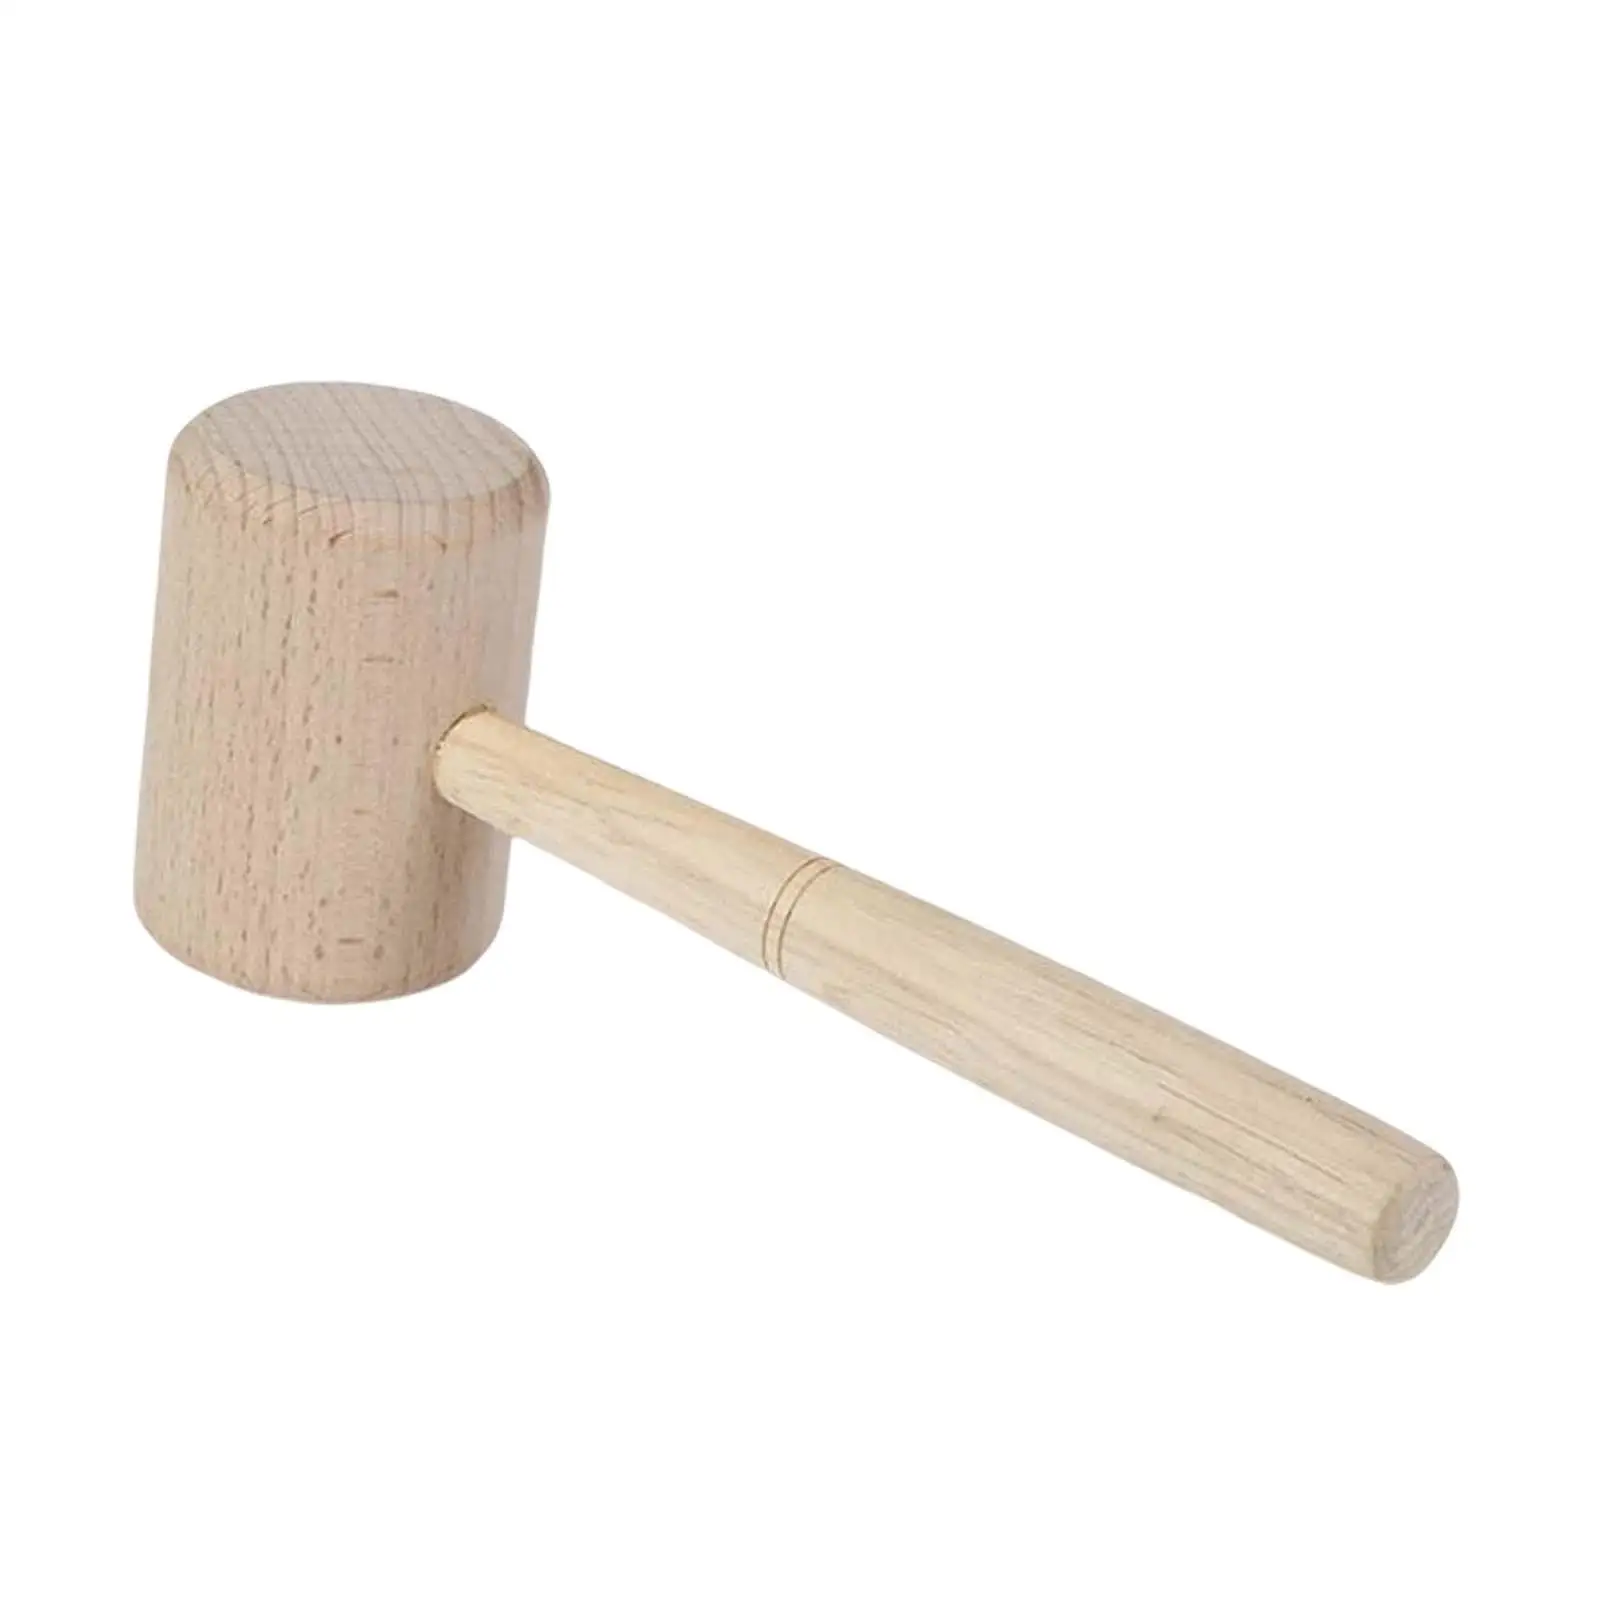 225mm Beech Solid Wood Mallet Shock Resistance Vintage Wooden Mallet Wooden Mallet Woodworking Hammer Wooden Hammer for Leather